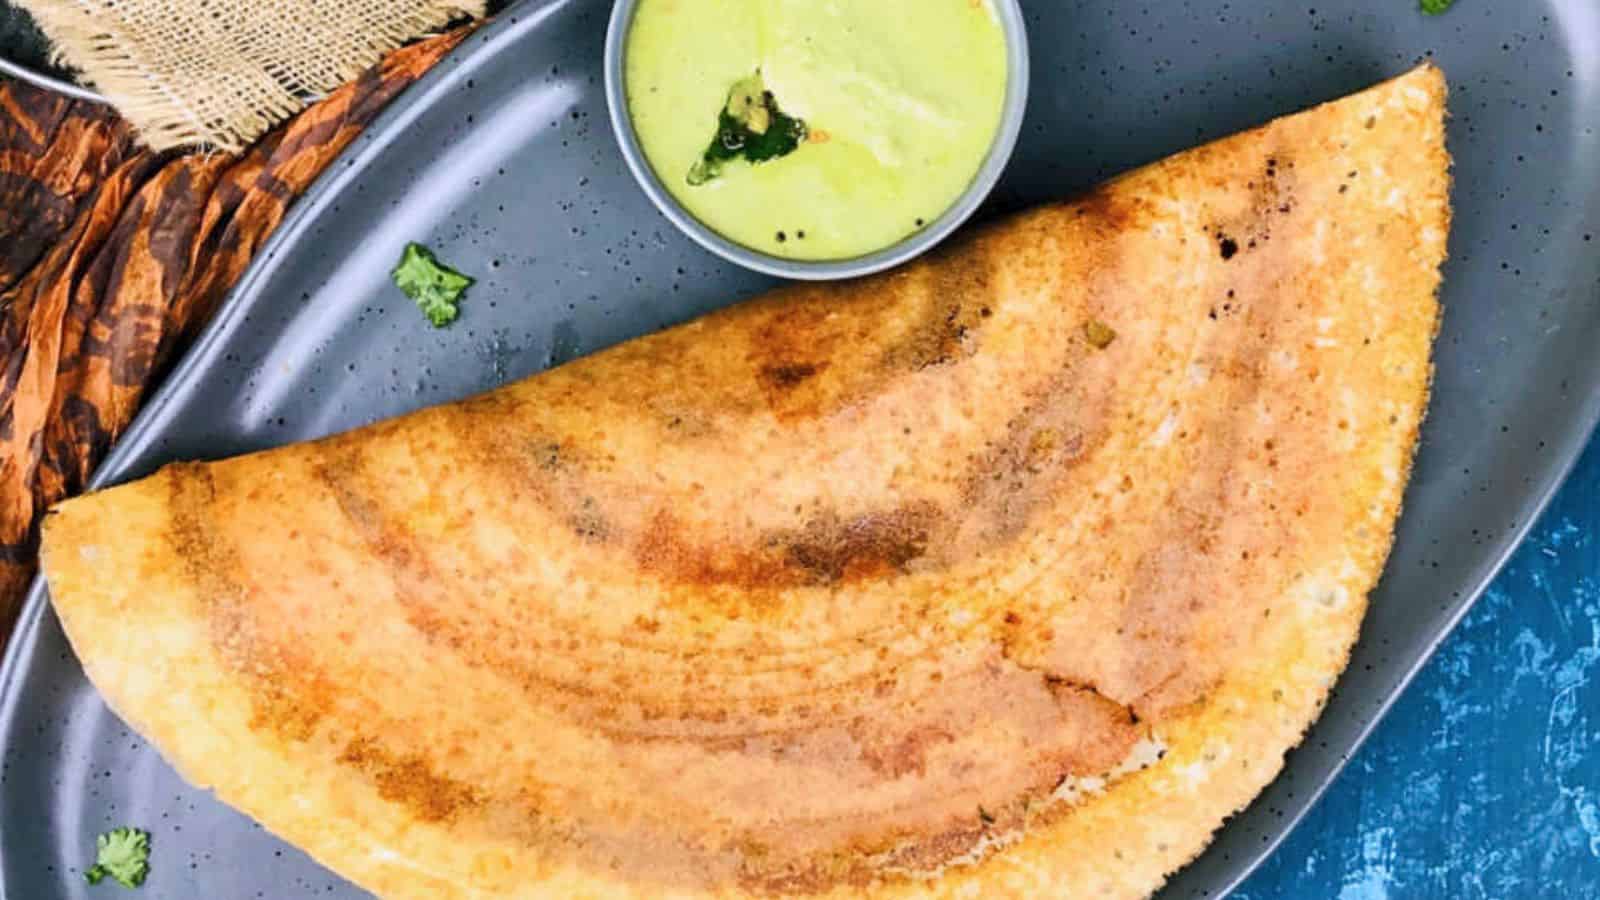 A folded, Mysore Masala Dosa on a dark plate served with a side of green chutney.